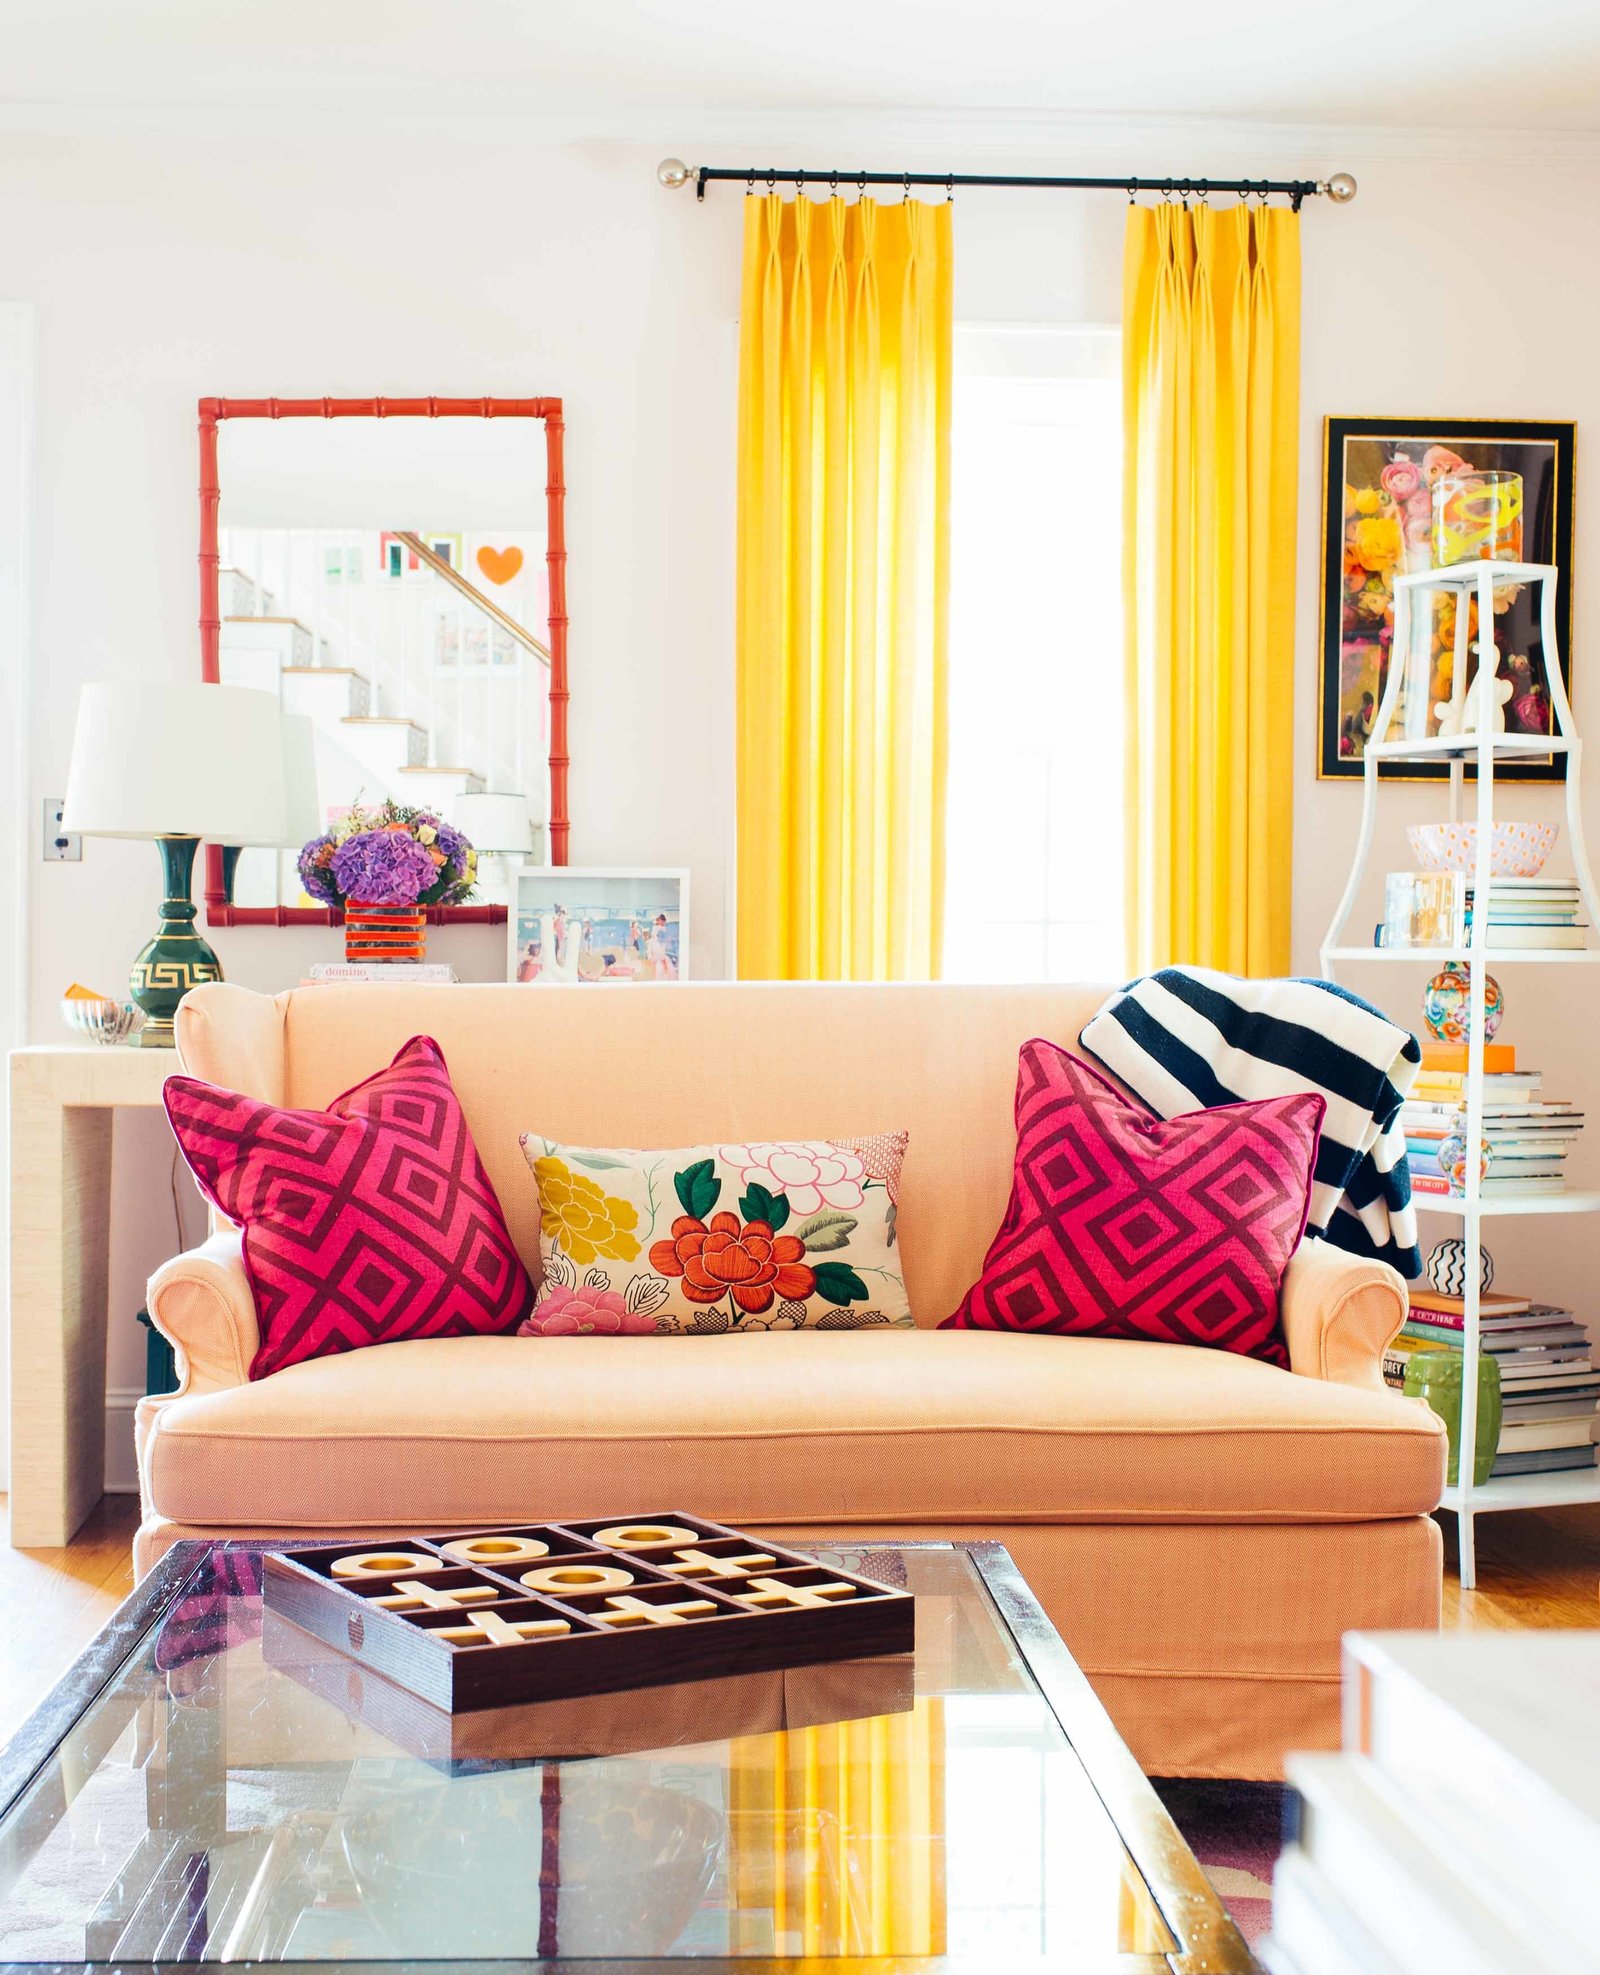 A peach love seat in a colorful living room.